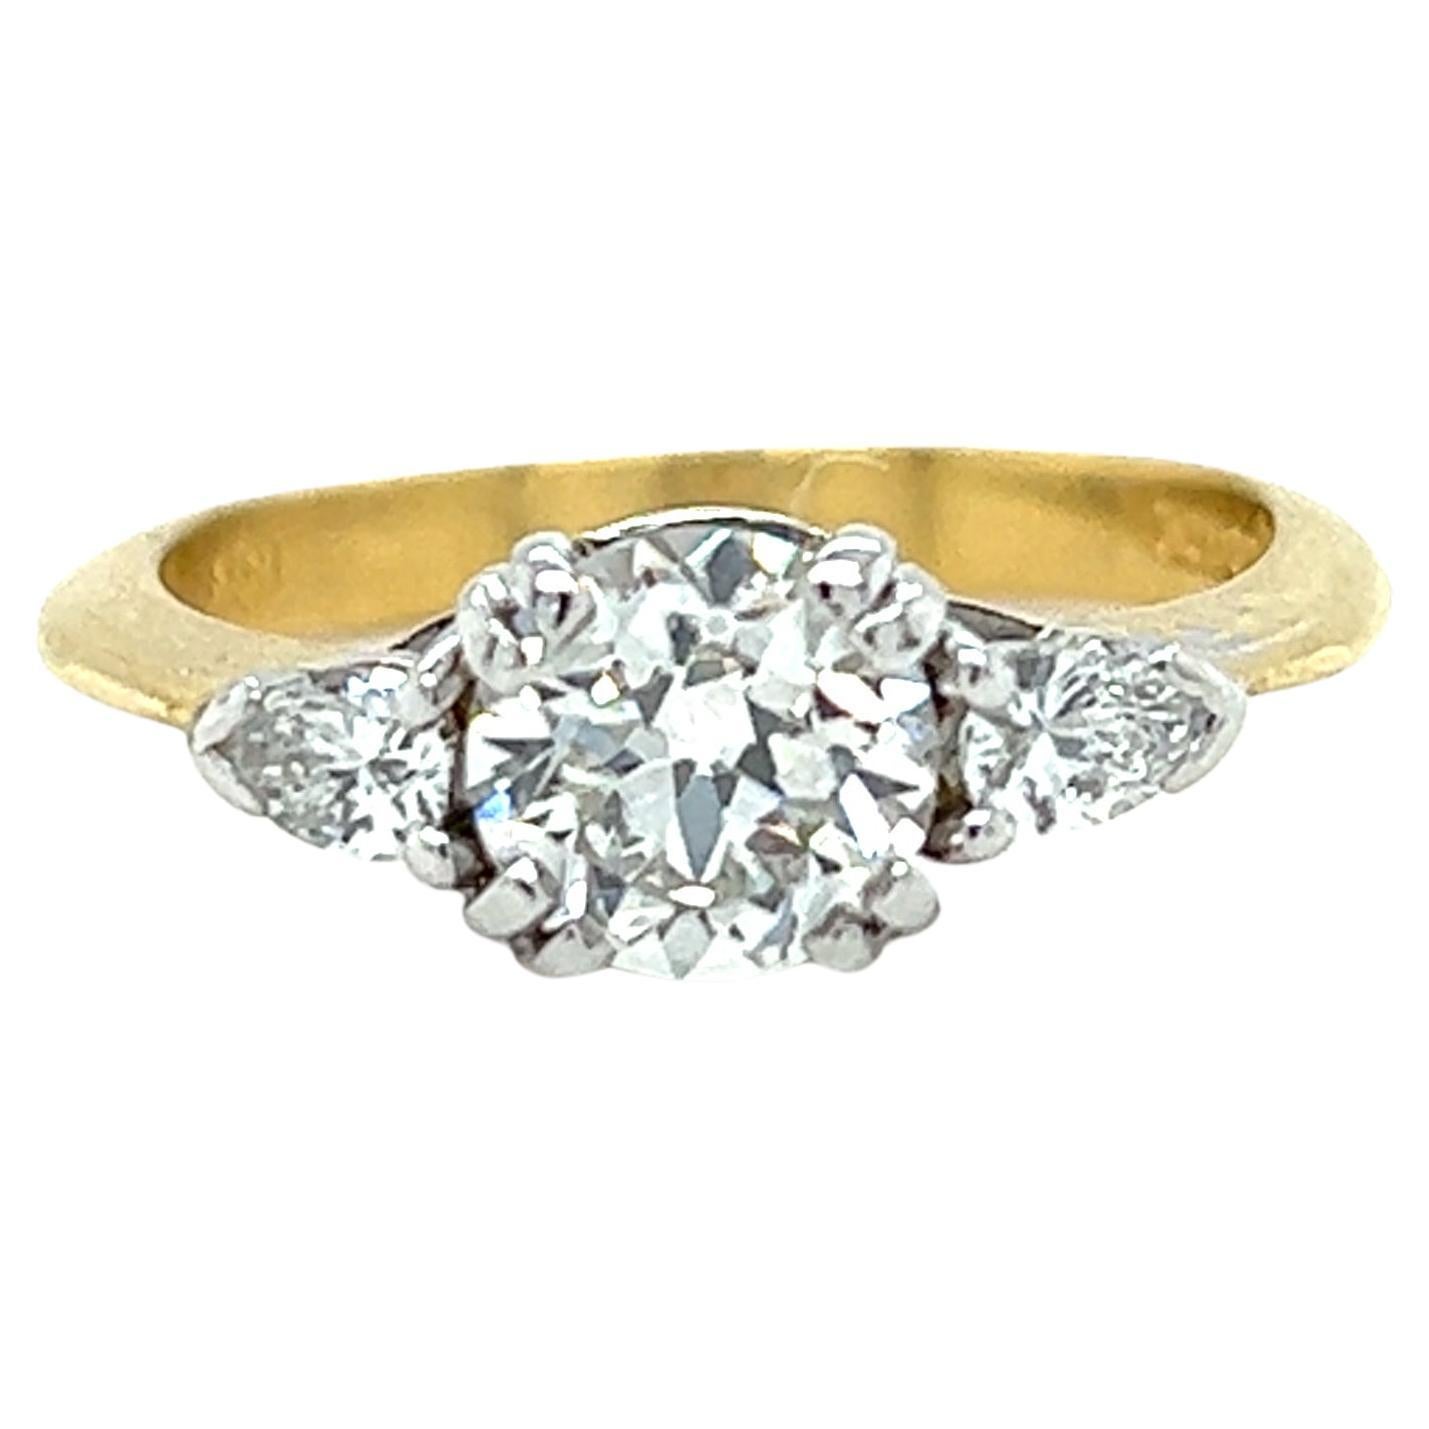 1.42ctw Old European Cut Diamond Engagement Ring in 18k White and Yellow Gold For Sale